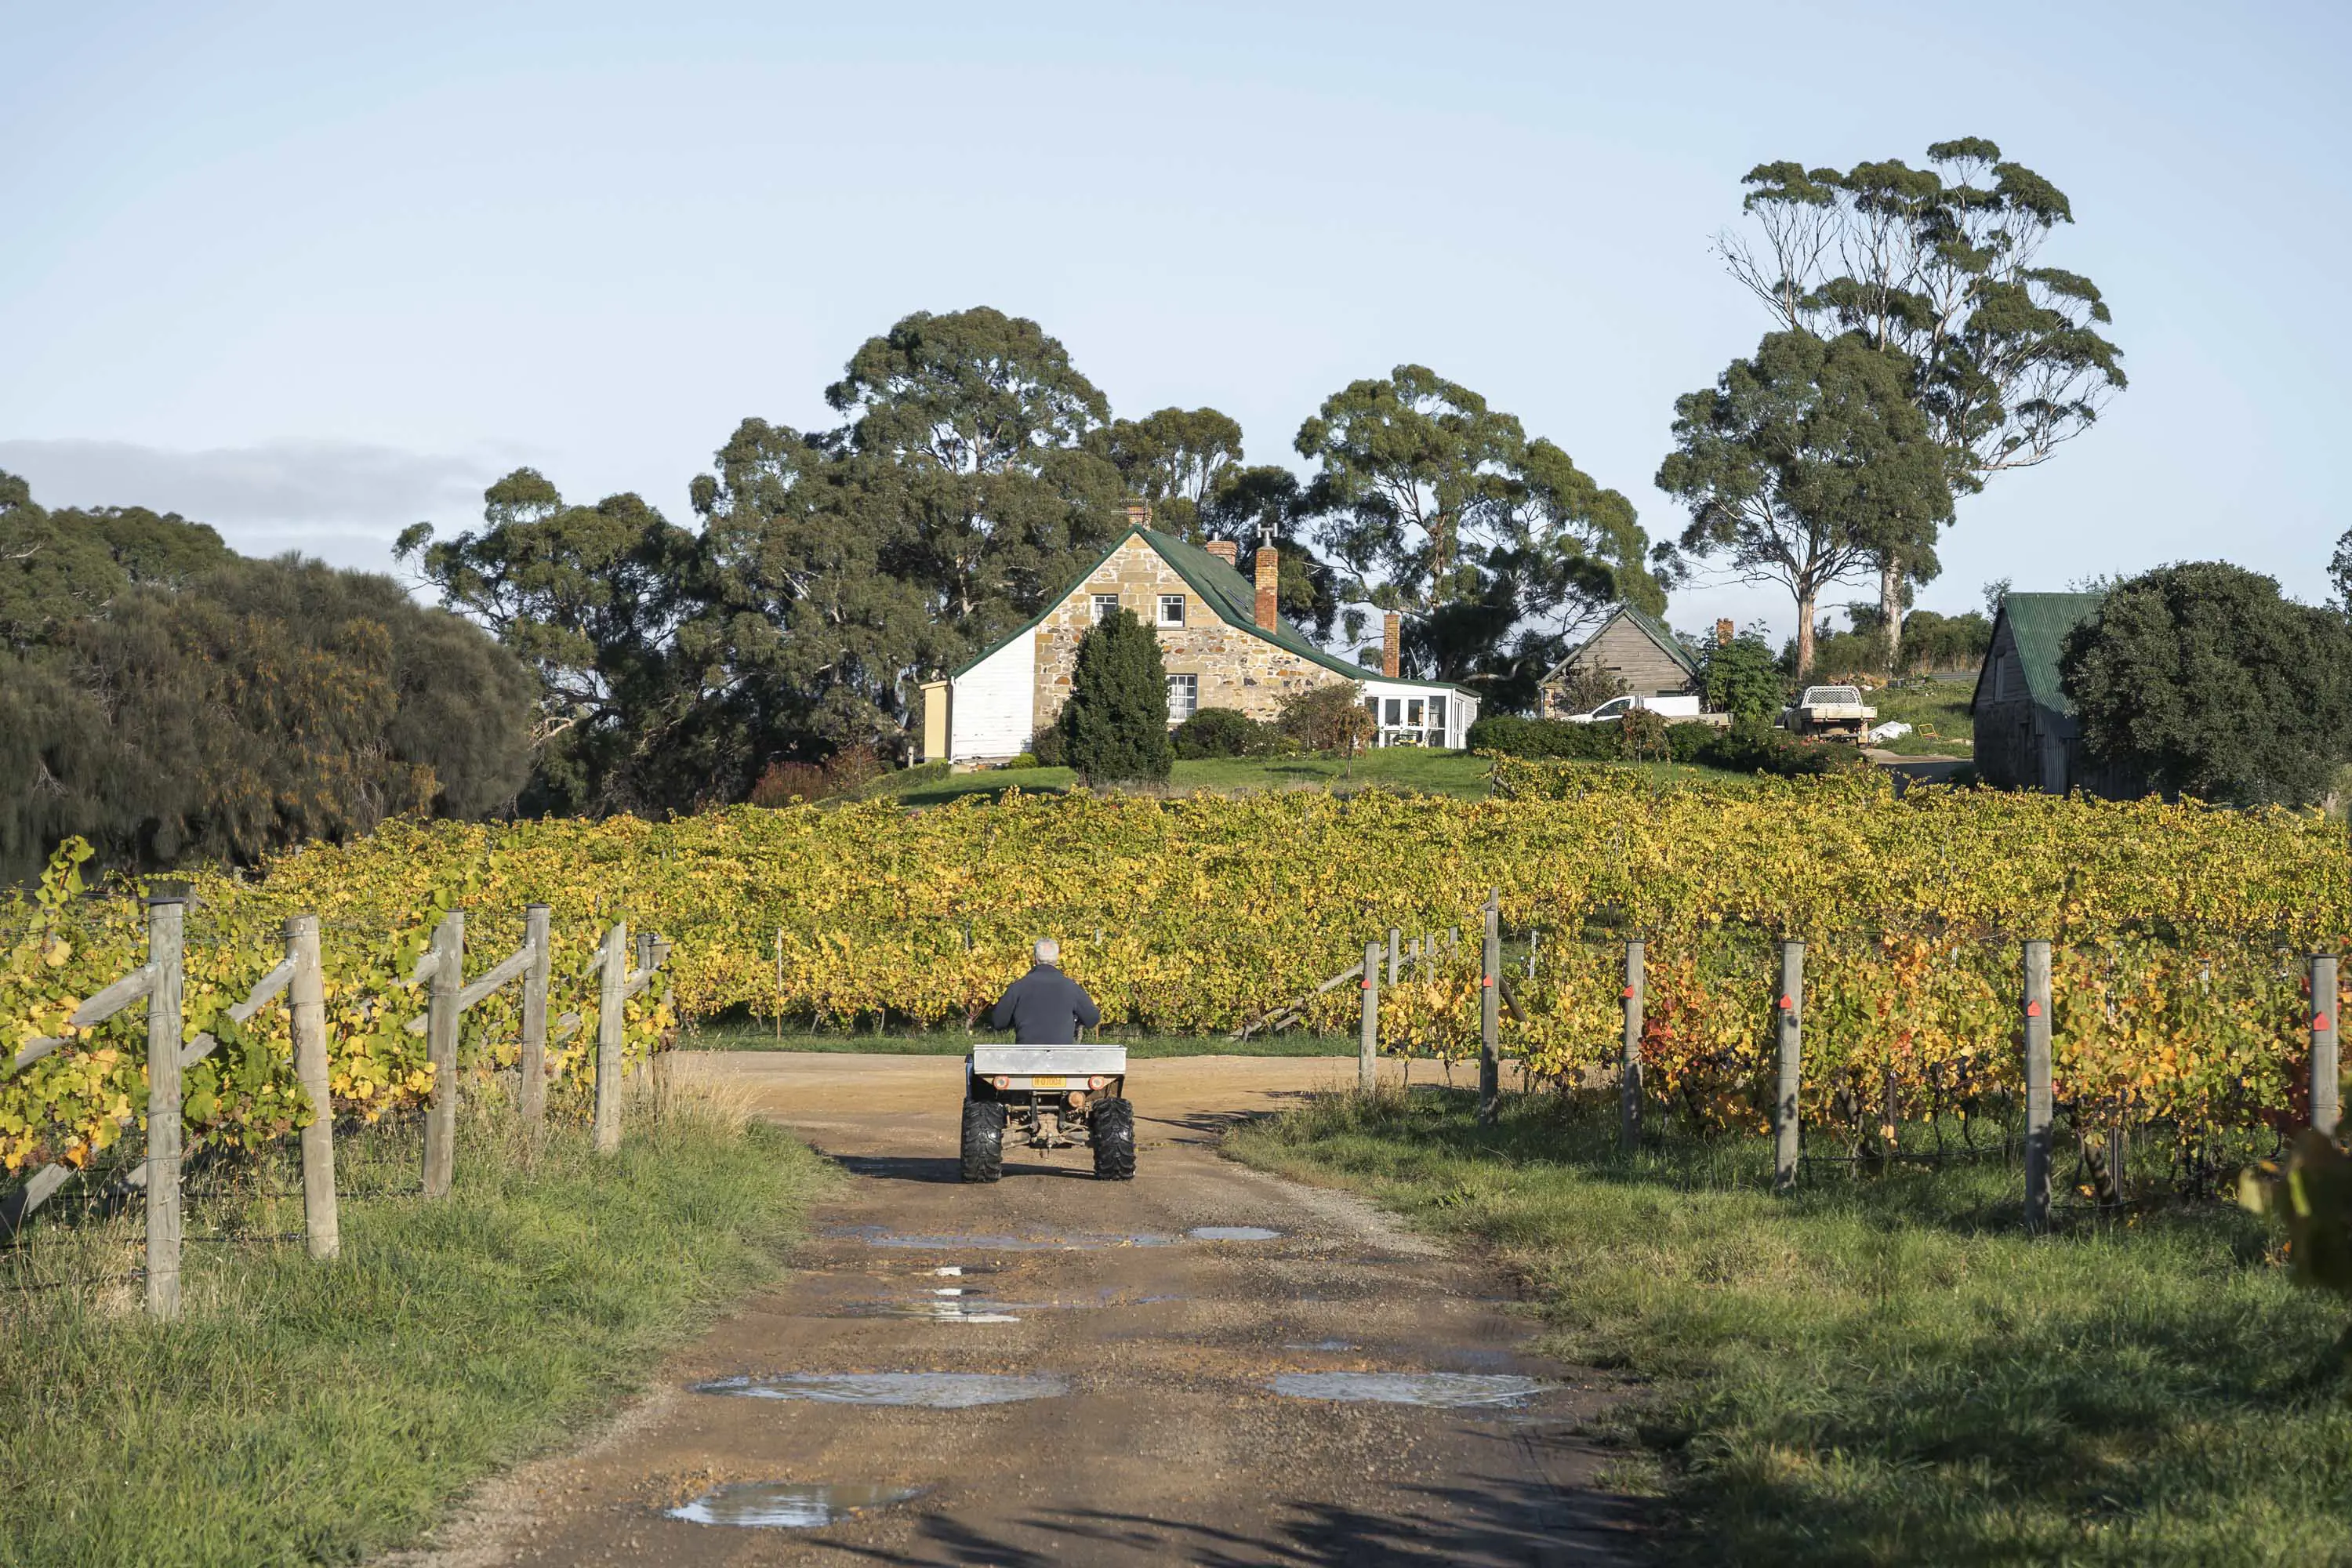 A man with white hair drives a small tractor along a gravel path between the rows of grape vines in front of a stone house.